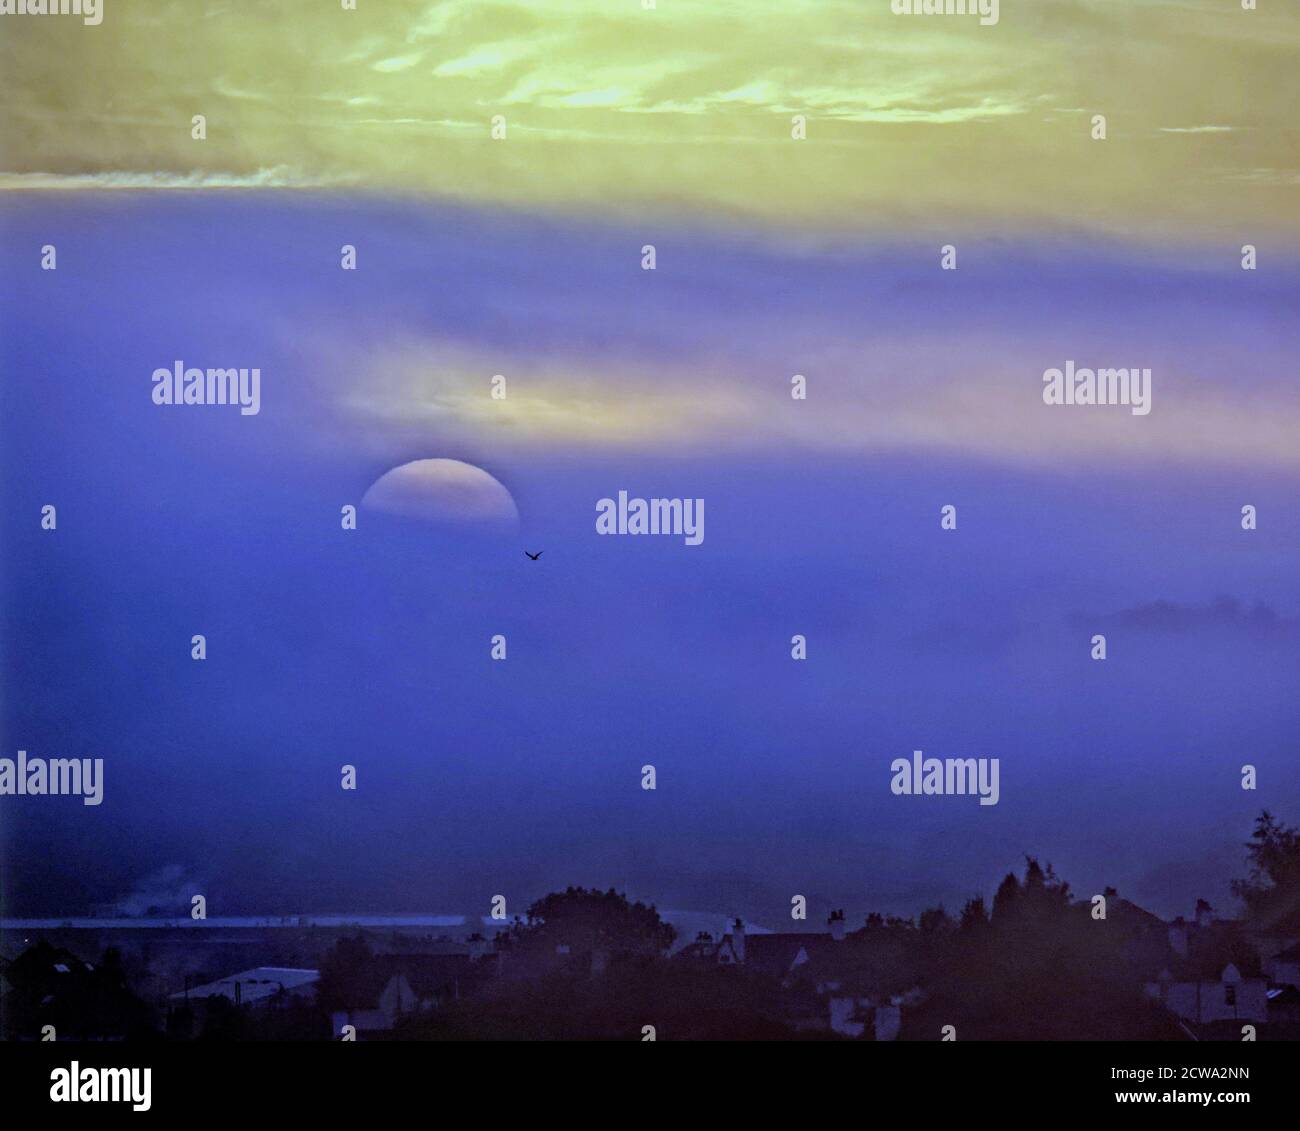 Glasgow, Scotland, UK, 29th September, 2020: UK Weather: Cold start saw freezing temperatures overnight as fog decimated the city leaving the dawn sun silhouettes overnight Credit: Gerard Ferry/Alamy Live News Stock Photo